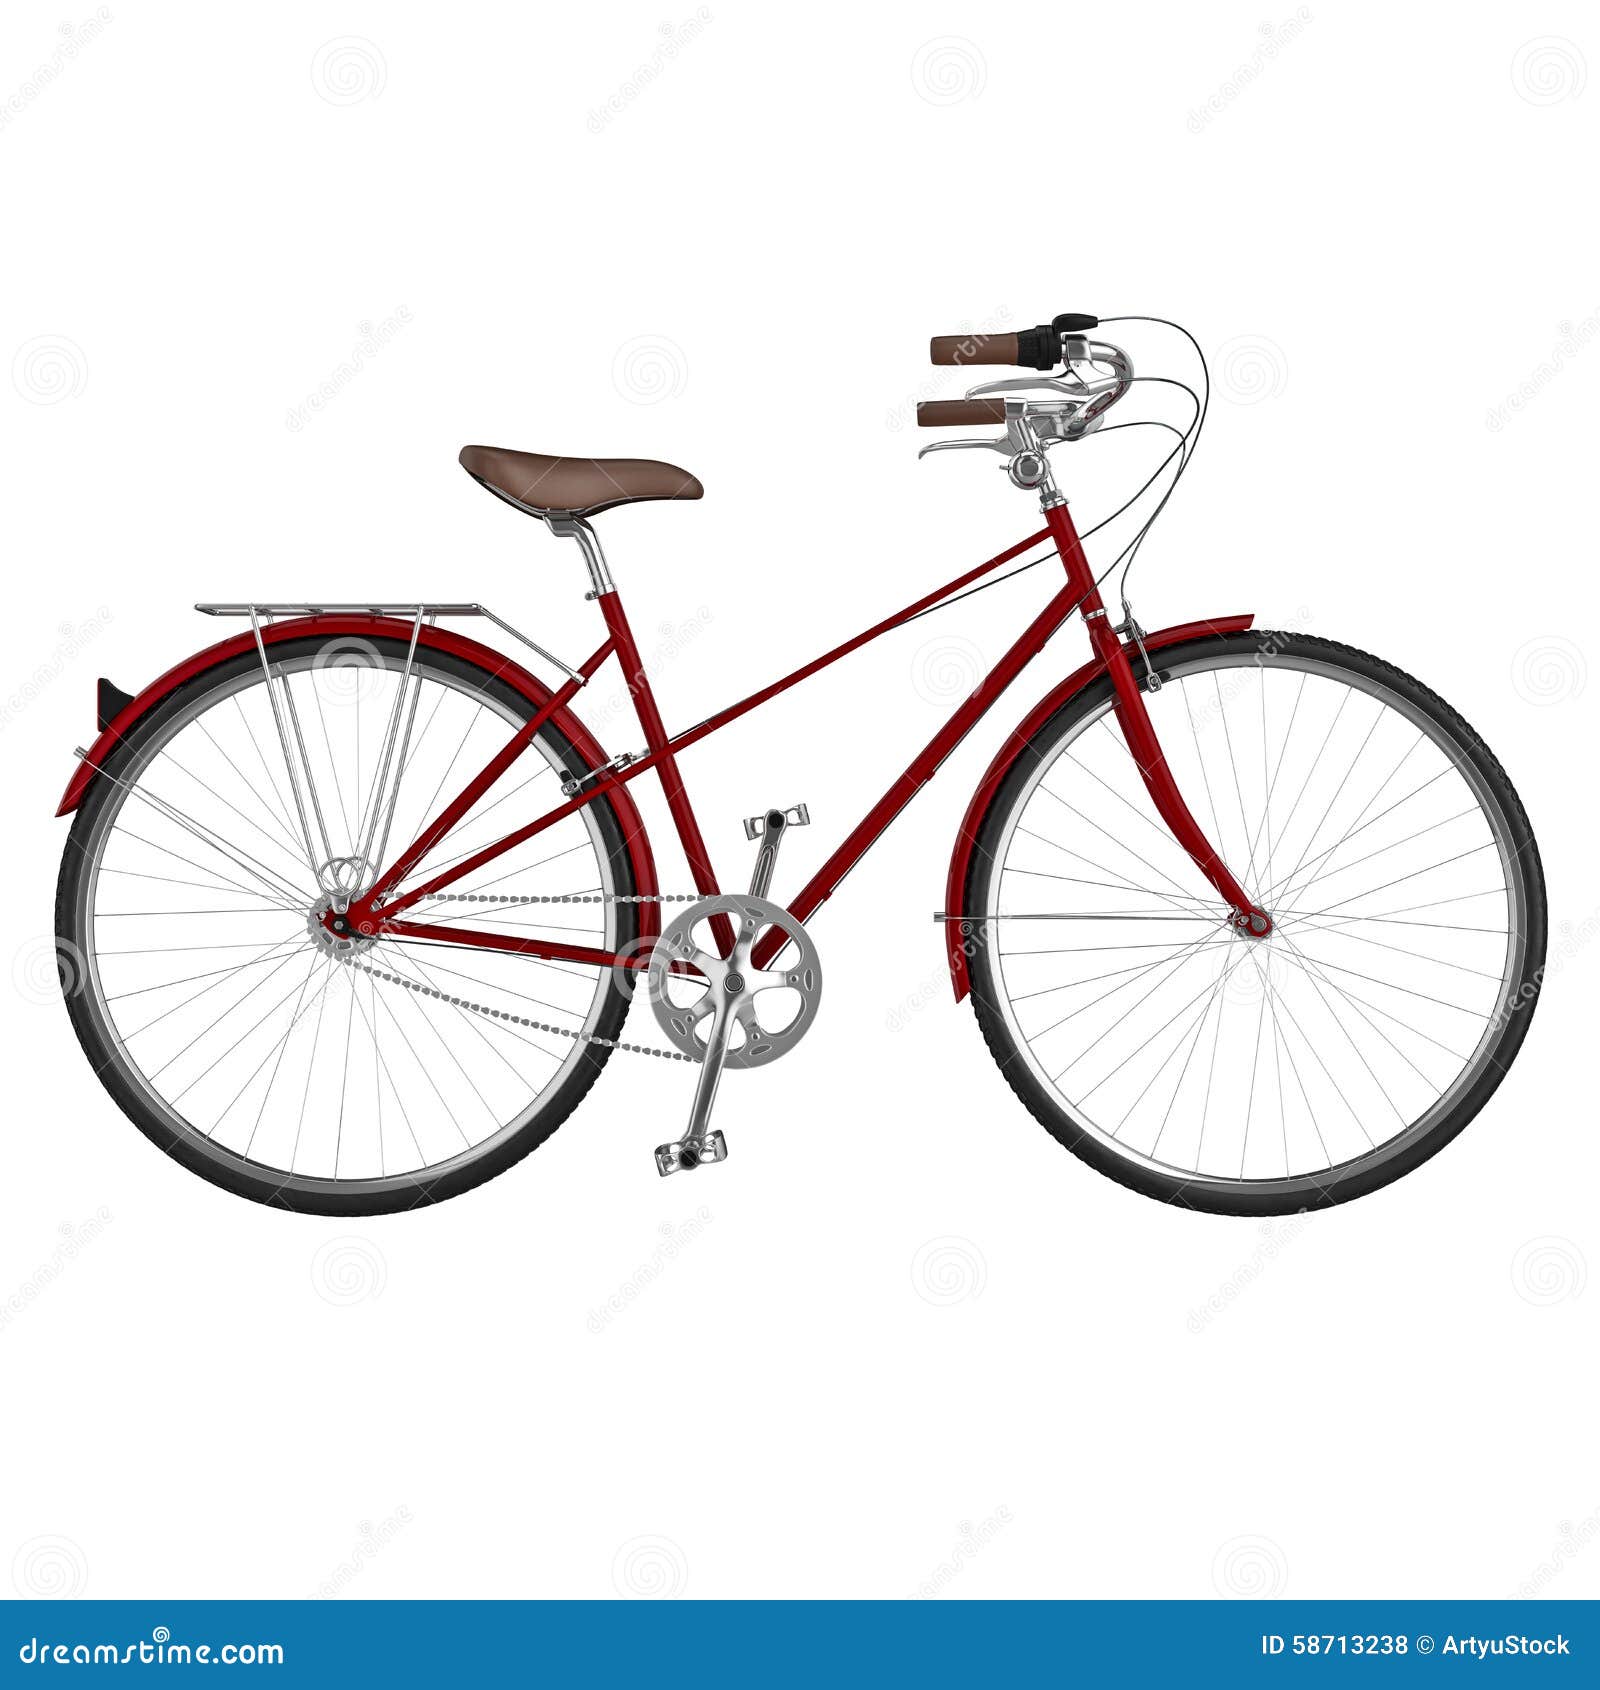 side view bicycle d graphic classic chrome detail some elements object white background 58713238